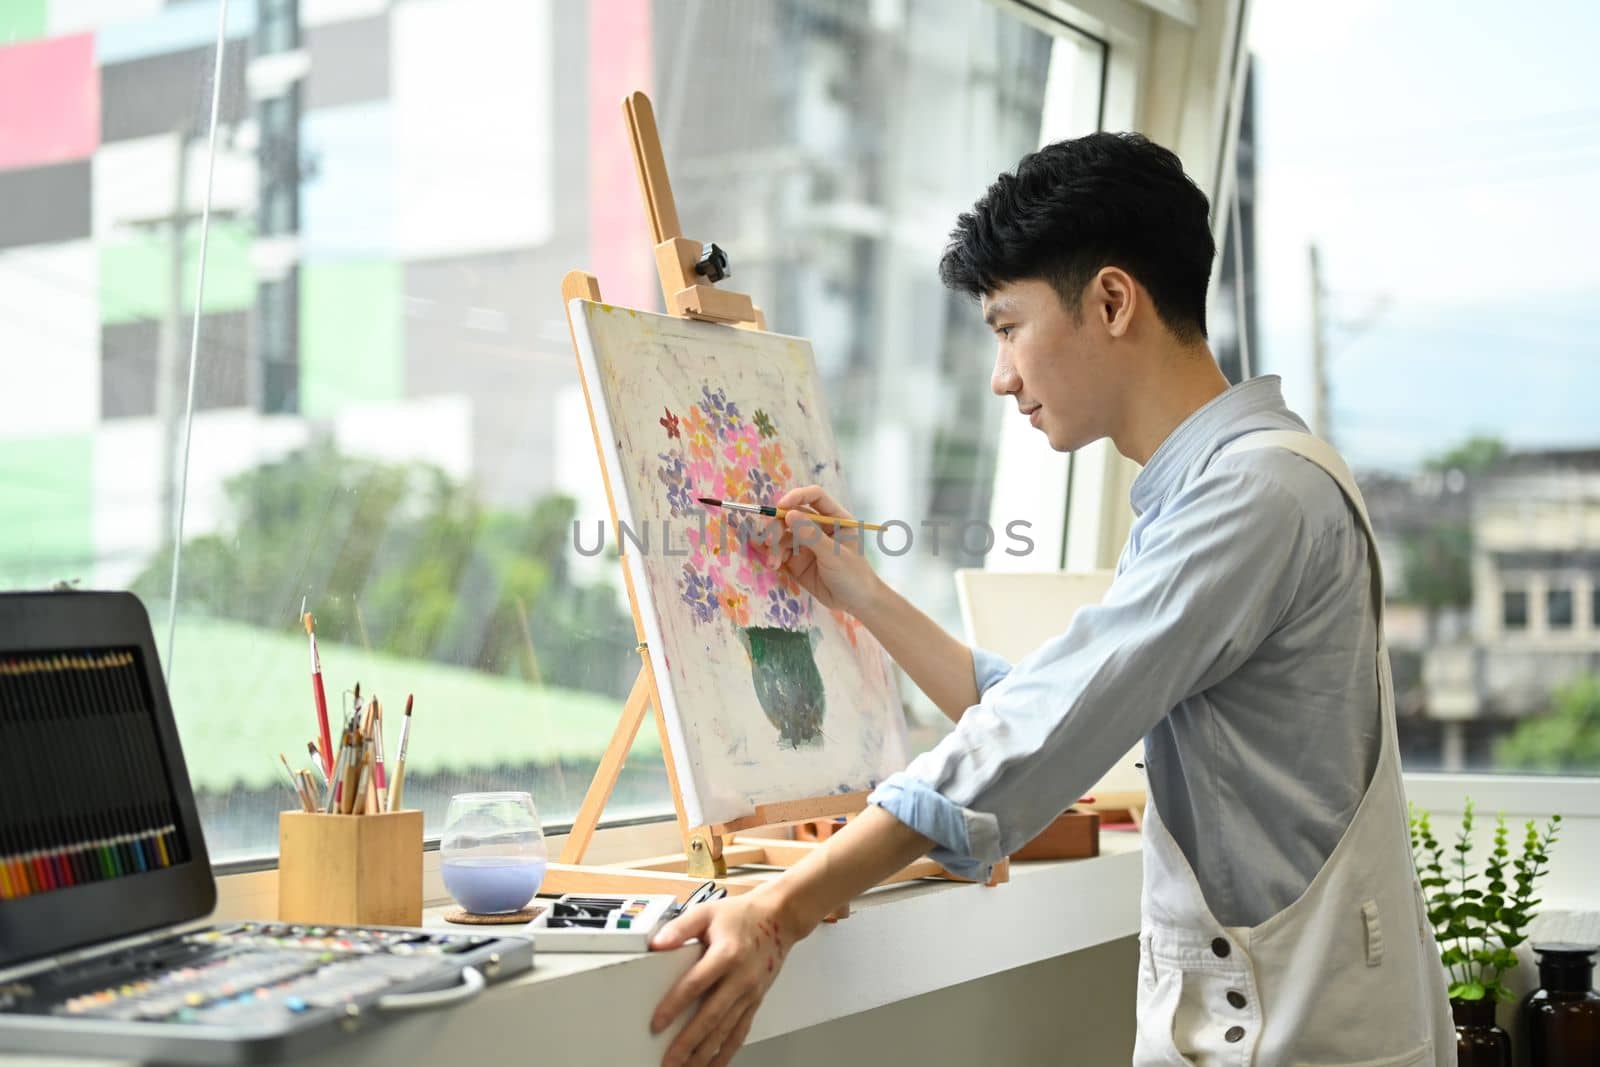 Concentrated man painting picture on canvas near window at art workshop. Leisure activity, creative hobby and art concept. 